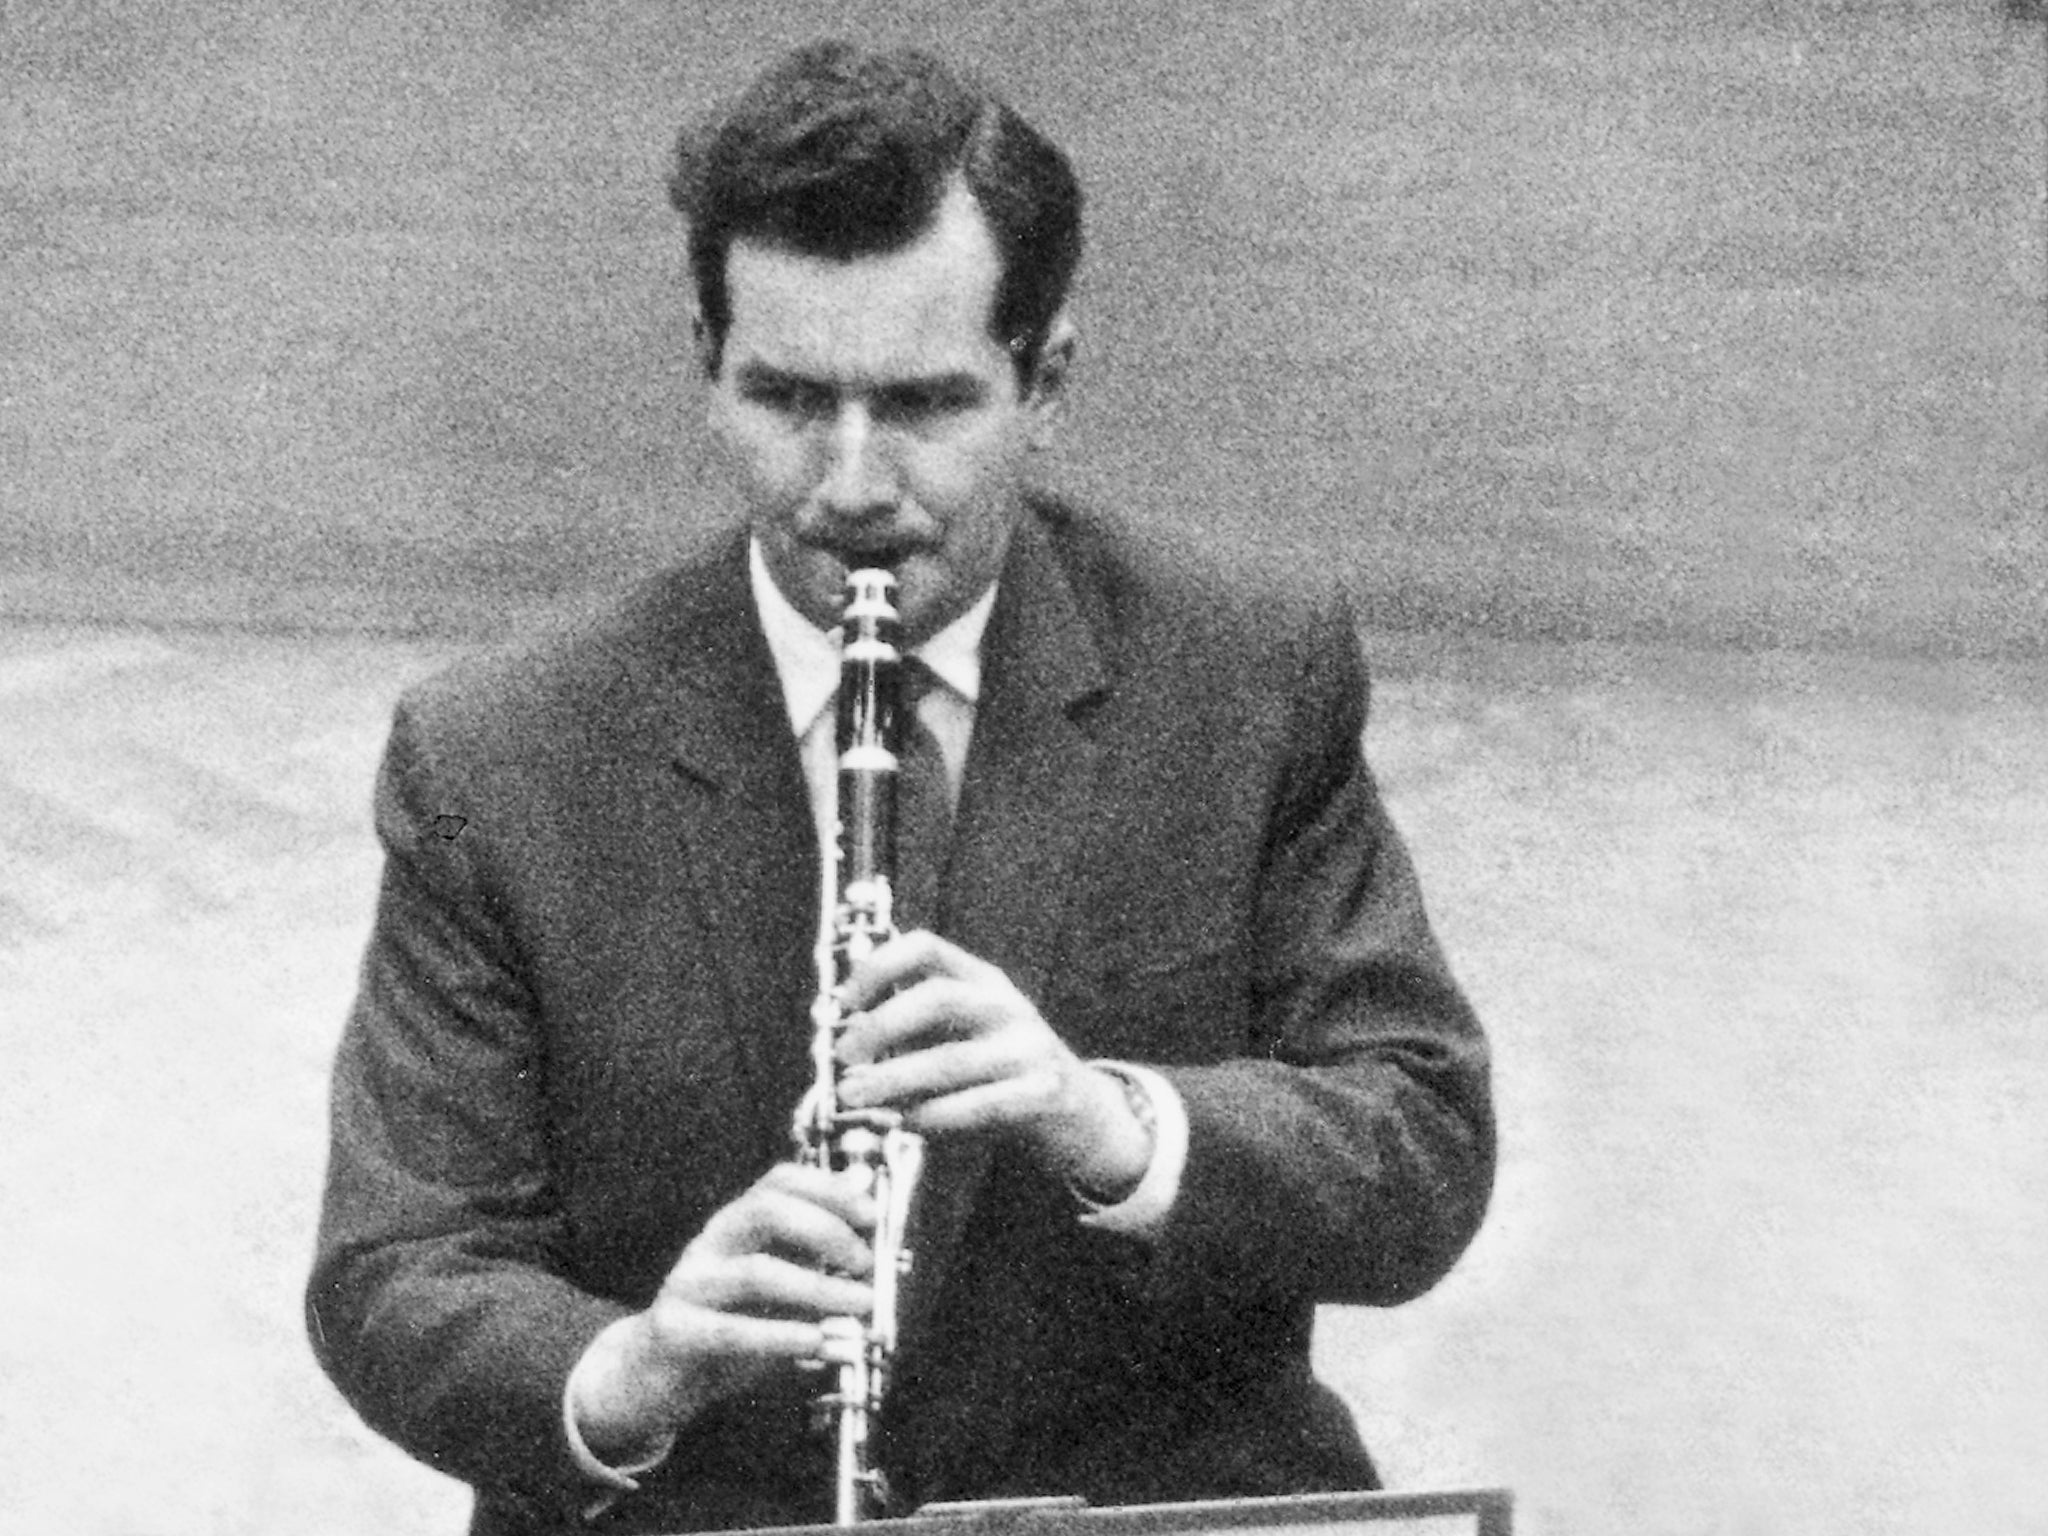 The clarinettist was born into a musical family in 1926